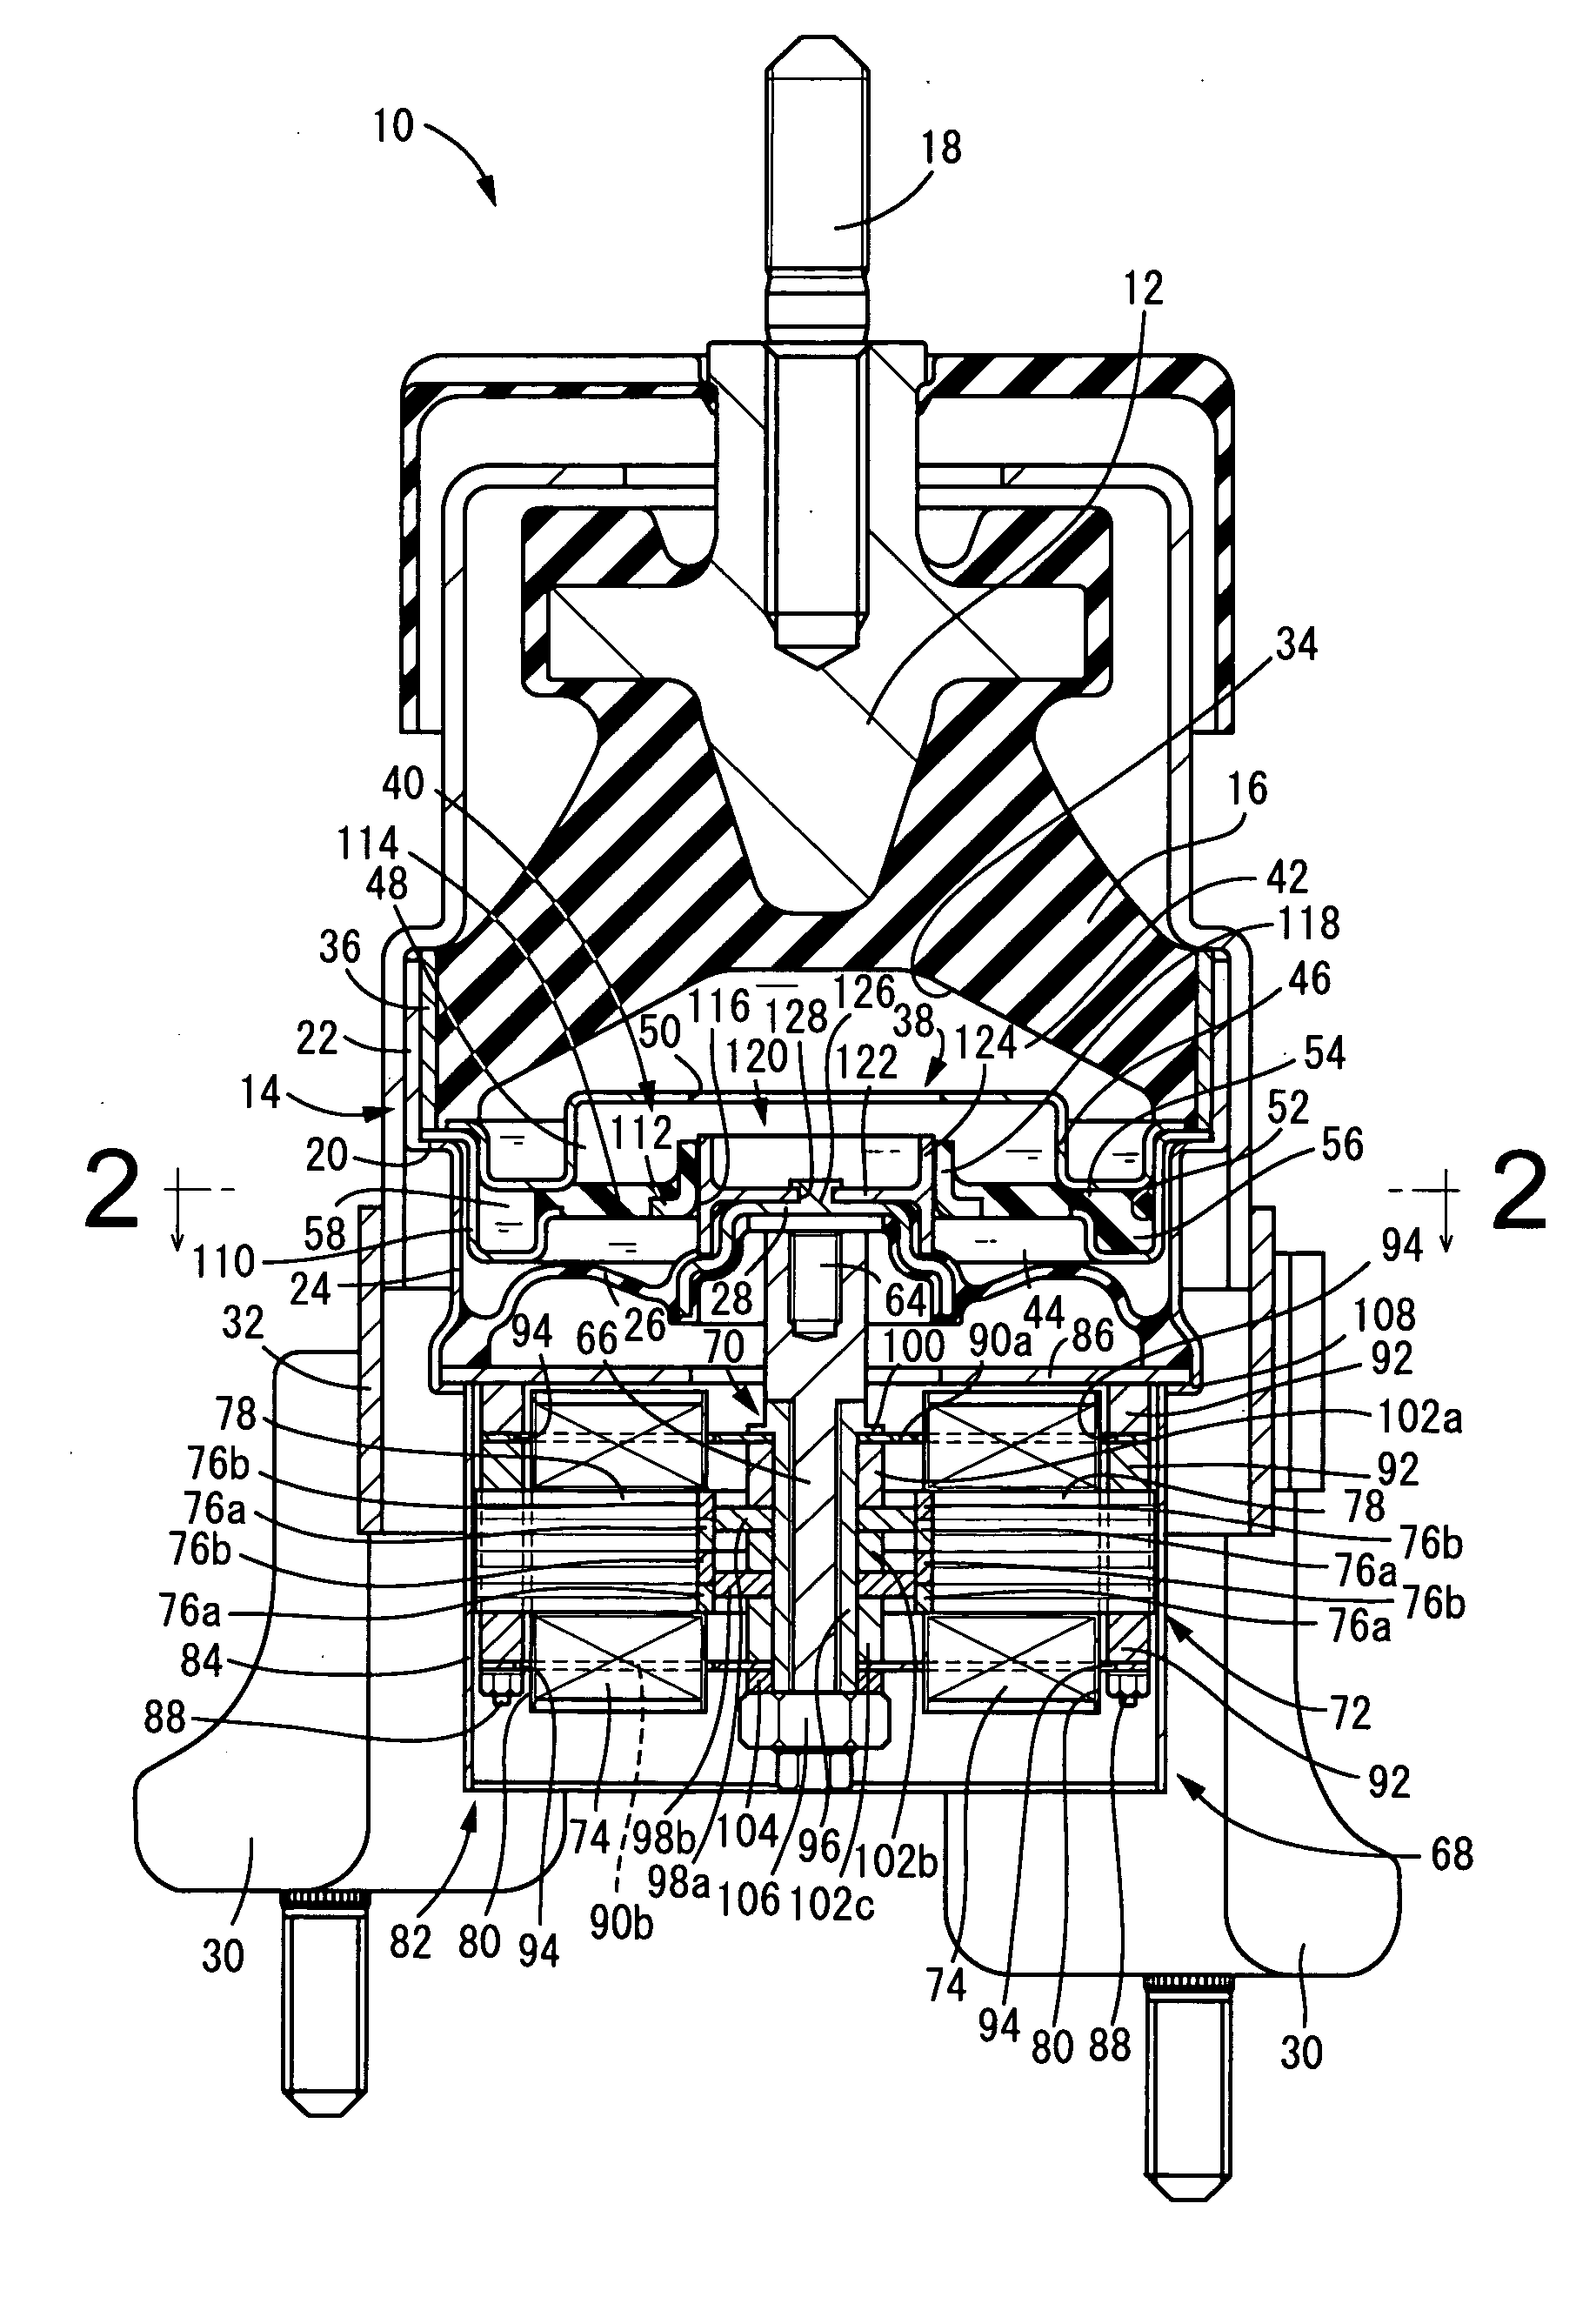 Fluid-filled active damping apparatus